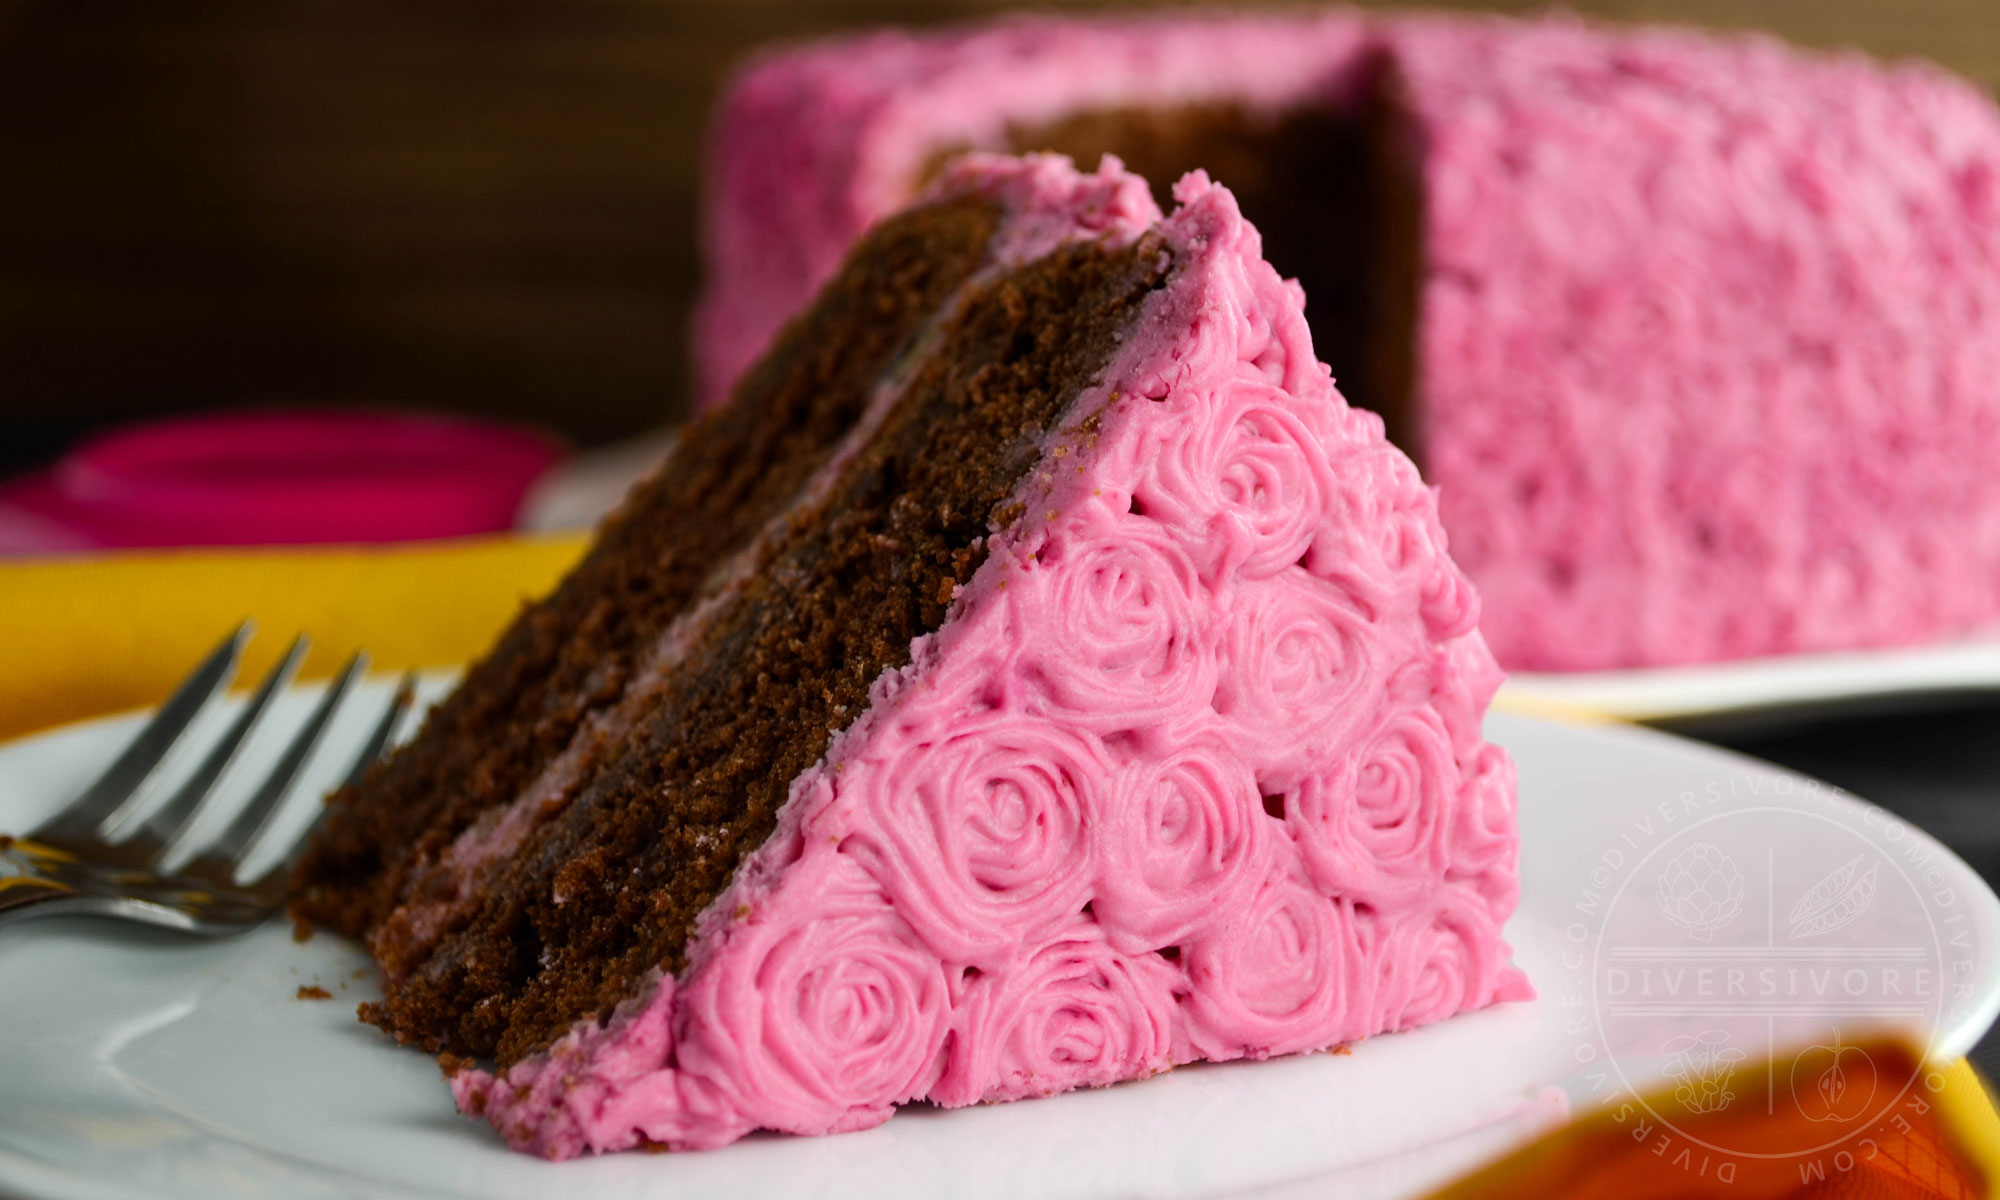 A slice of chocolate cake made with beetroot and candied pecans, frosted with pink cream cheese frosting rosettes